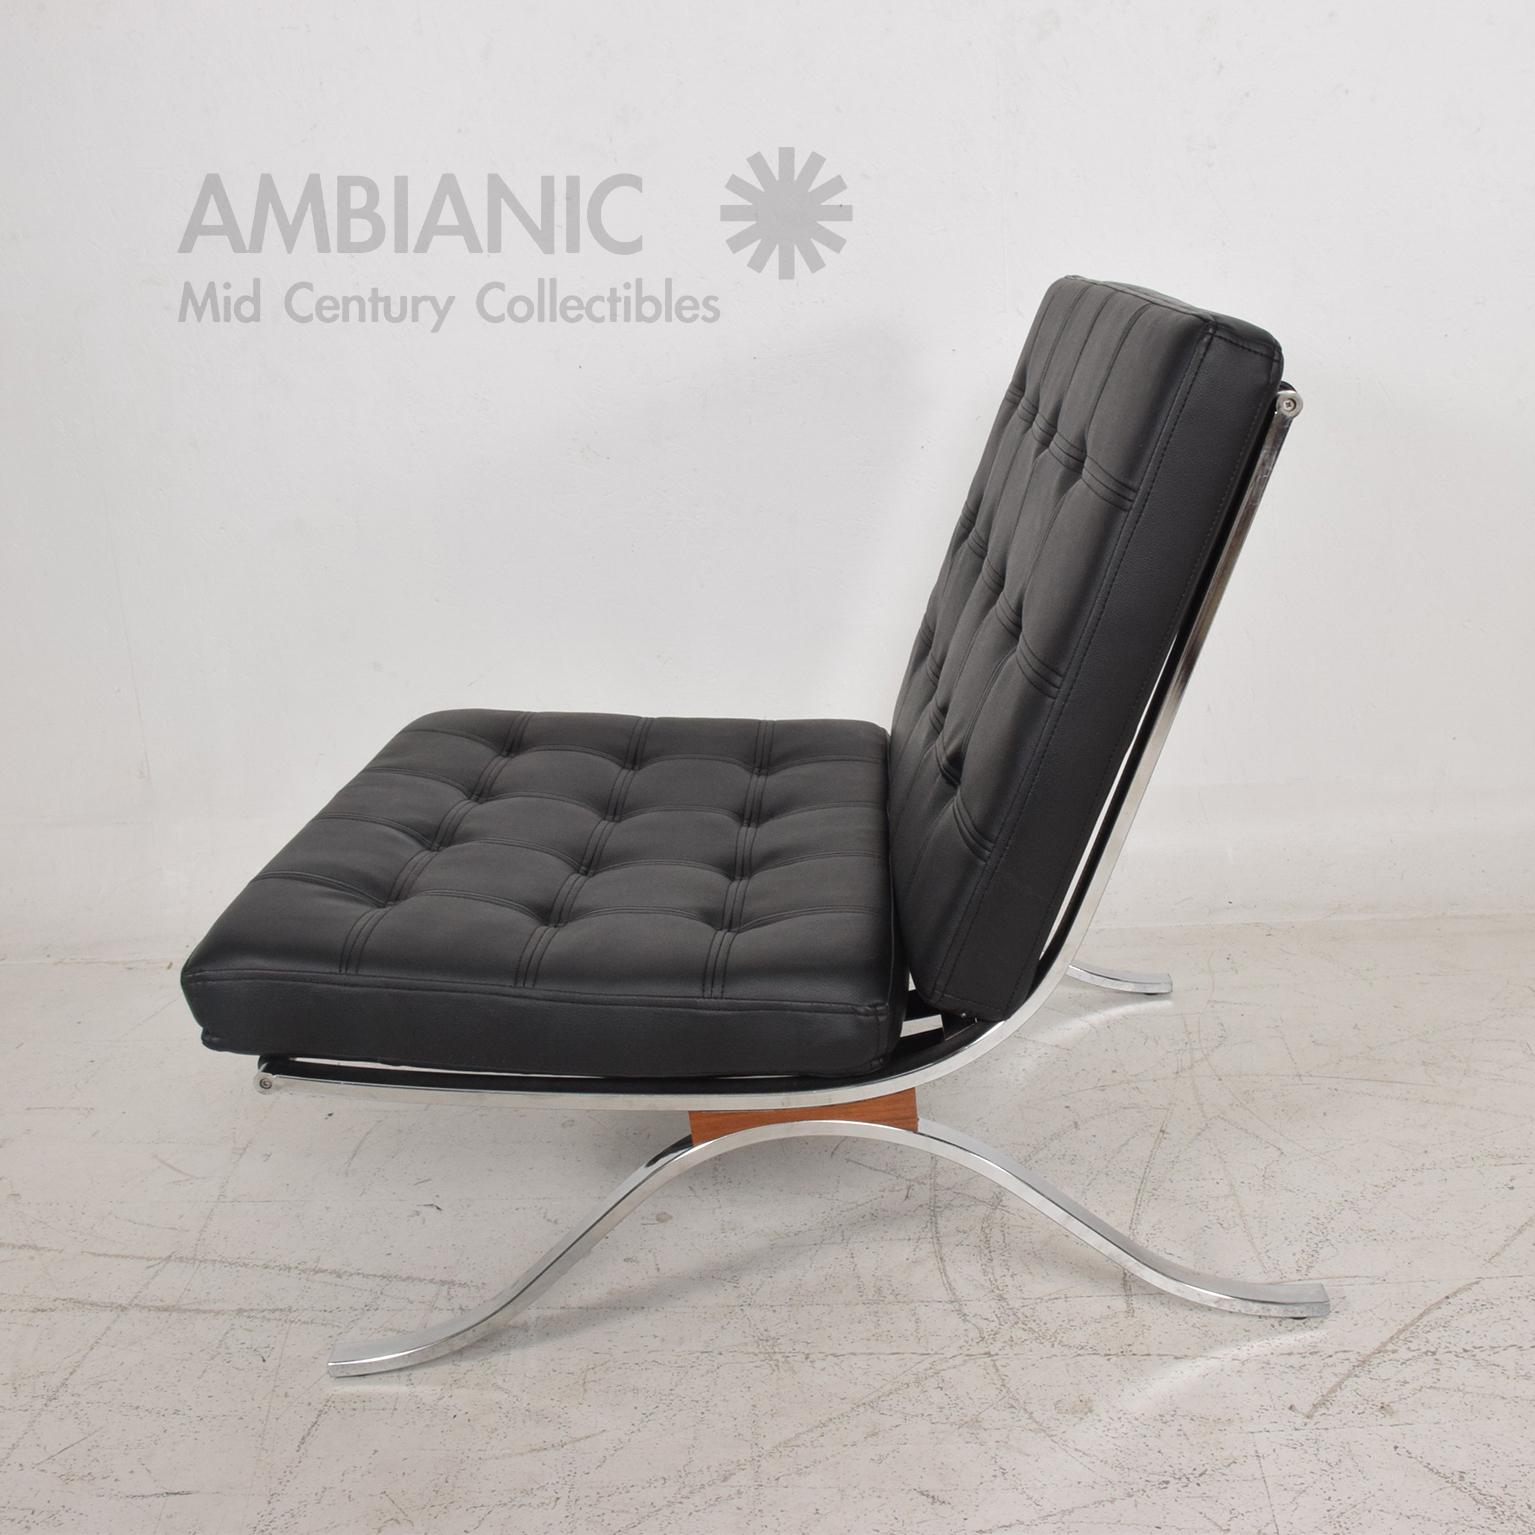 American Mid-Century Modern SELIG Barcelona Lounge Chair in Chrome and Faux Leather 1960s